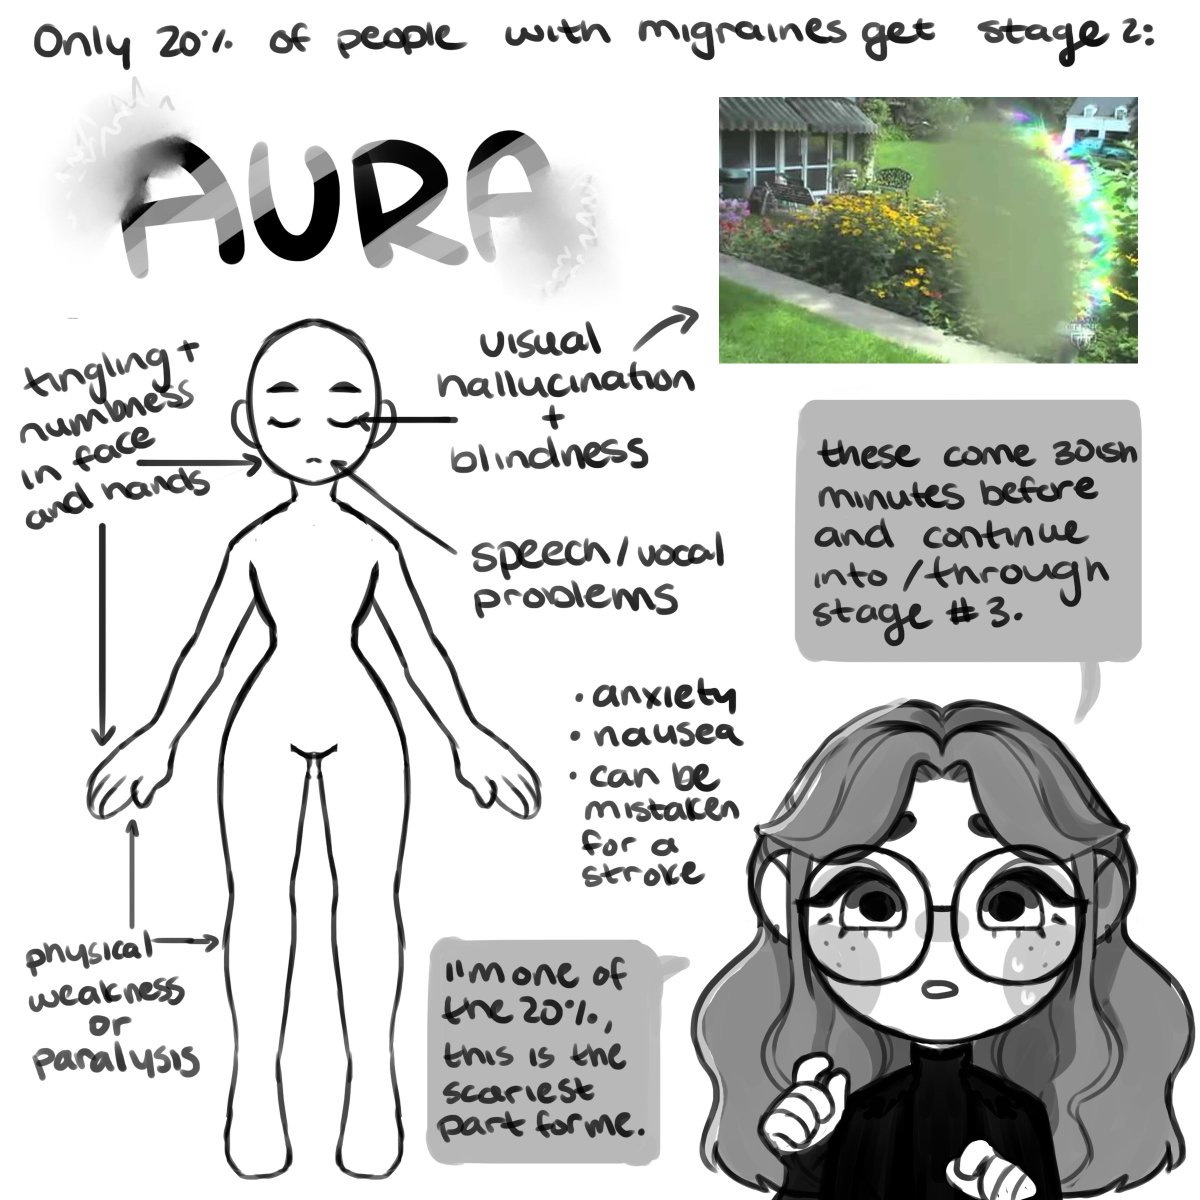 AN ILLUSTRATED GUIDE ON ✨ AURA MIGRAINES ✨

I've had this condition for the last 8 years, and I figured this would be a good way to explain to people what happens to me, and spread awareness that migraines aren't "Just Headaches" 1/2 